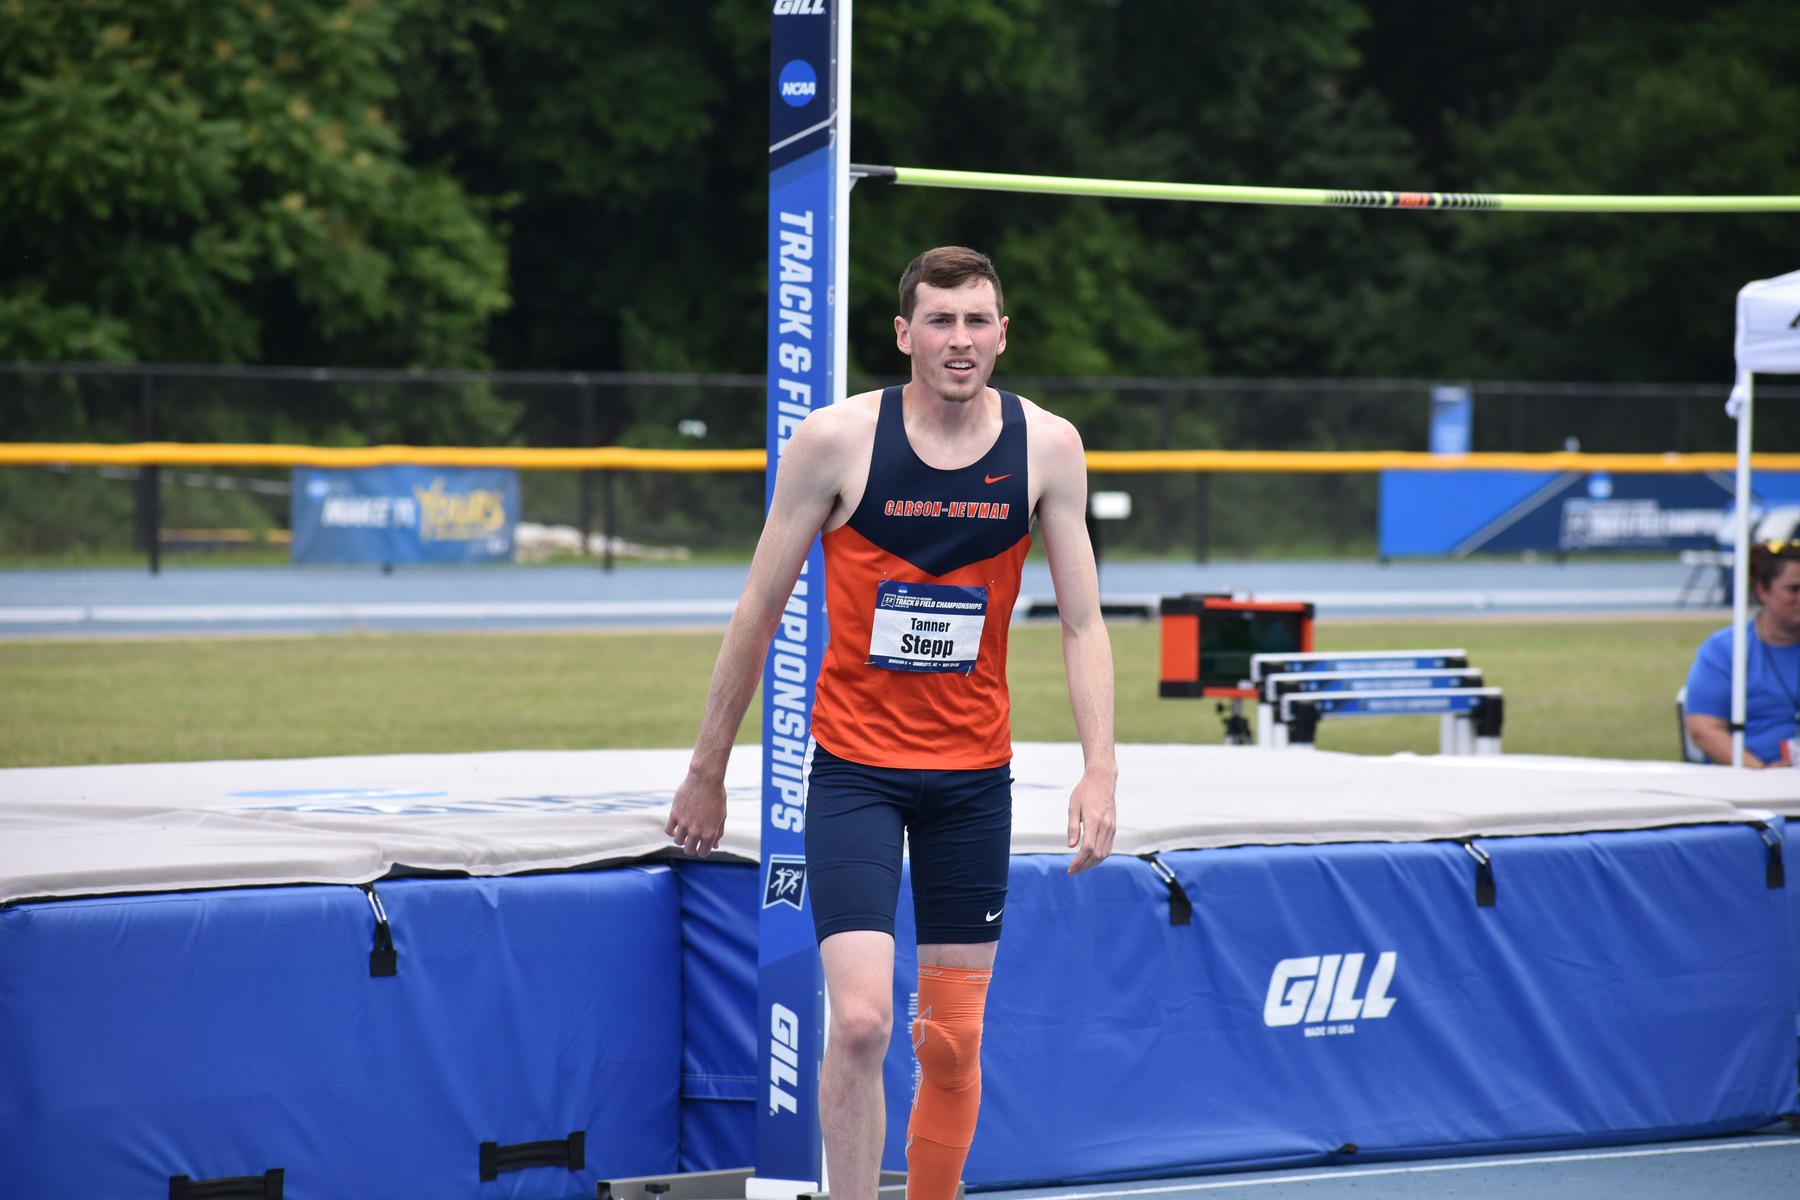 Illustrious career for Stepp comes to a close at the NCAA Championships